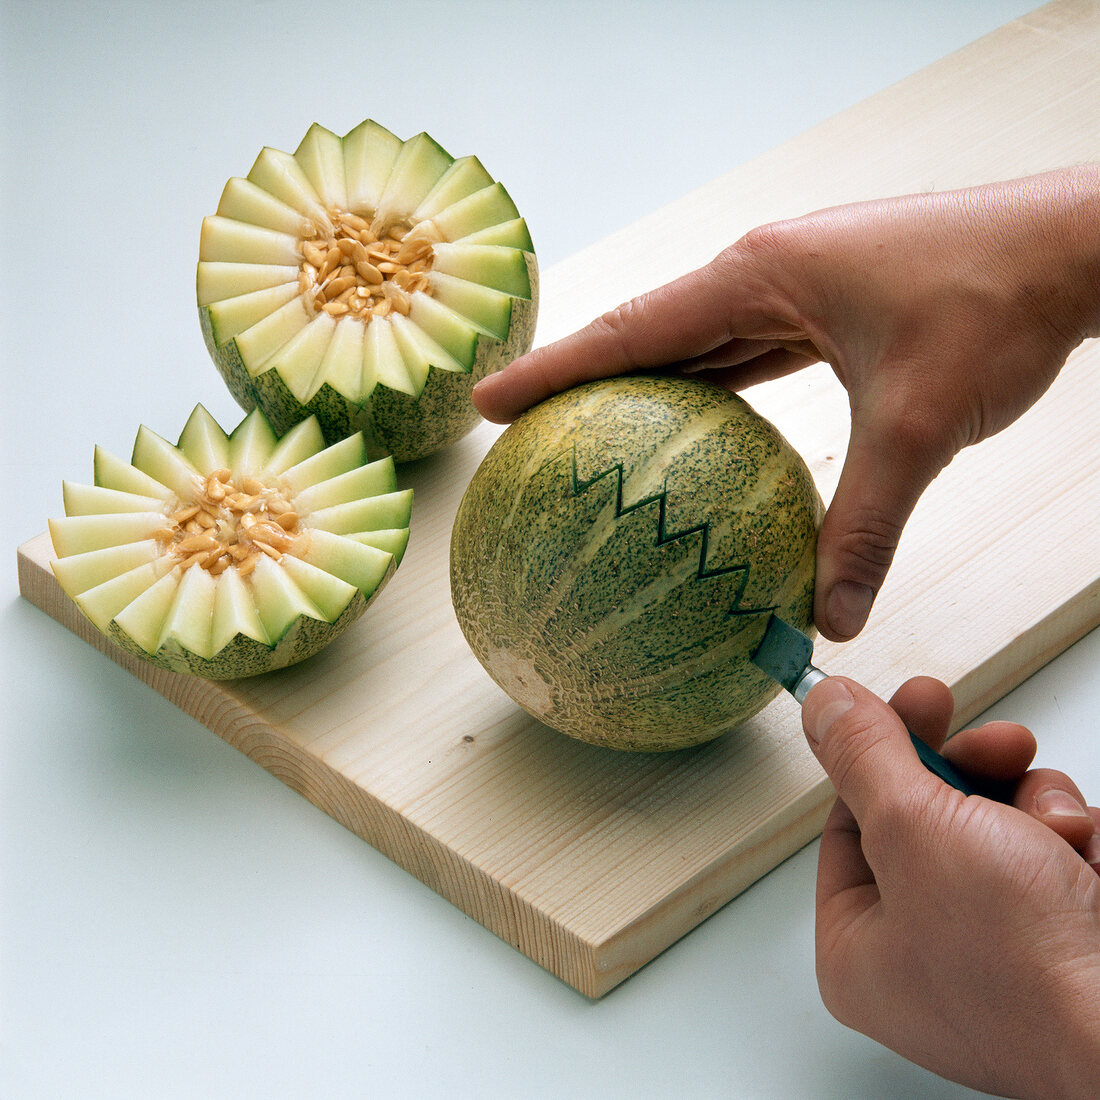 Close-up of hand cutting melon in jagged shape on white background